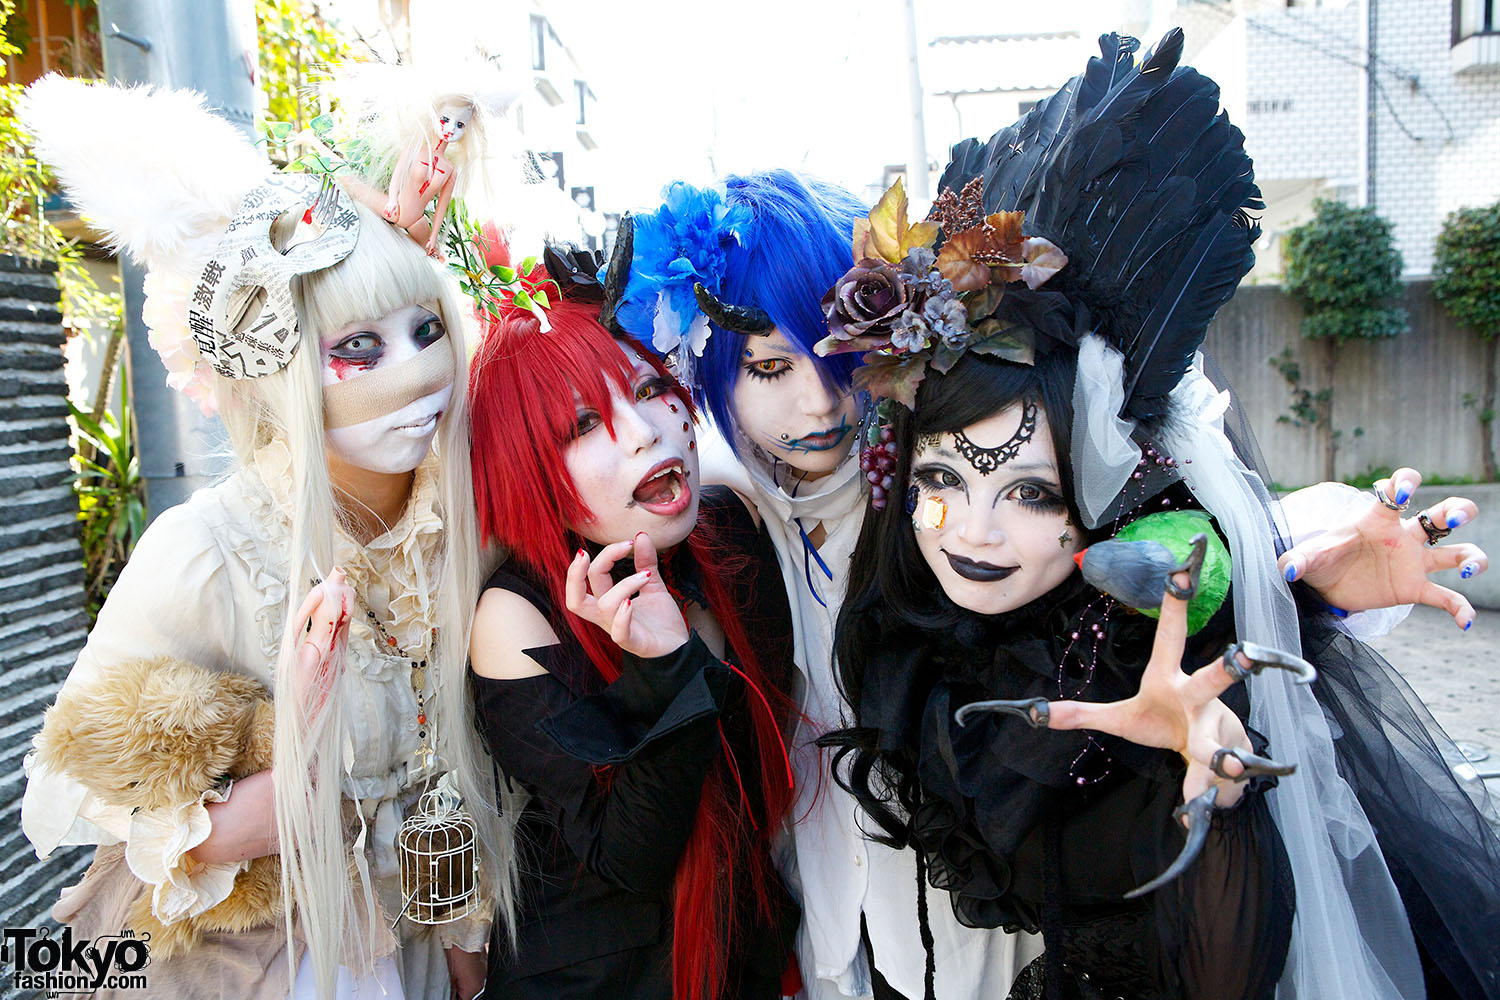 Japanese Shironuri “White Face Monster Party” in Harajuku – Pics & Video